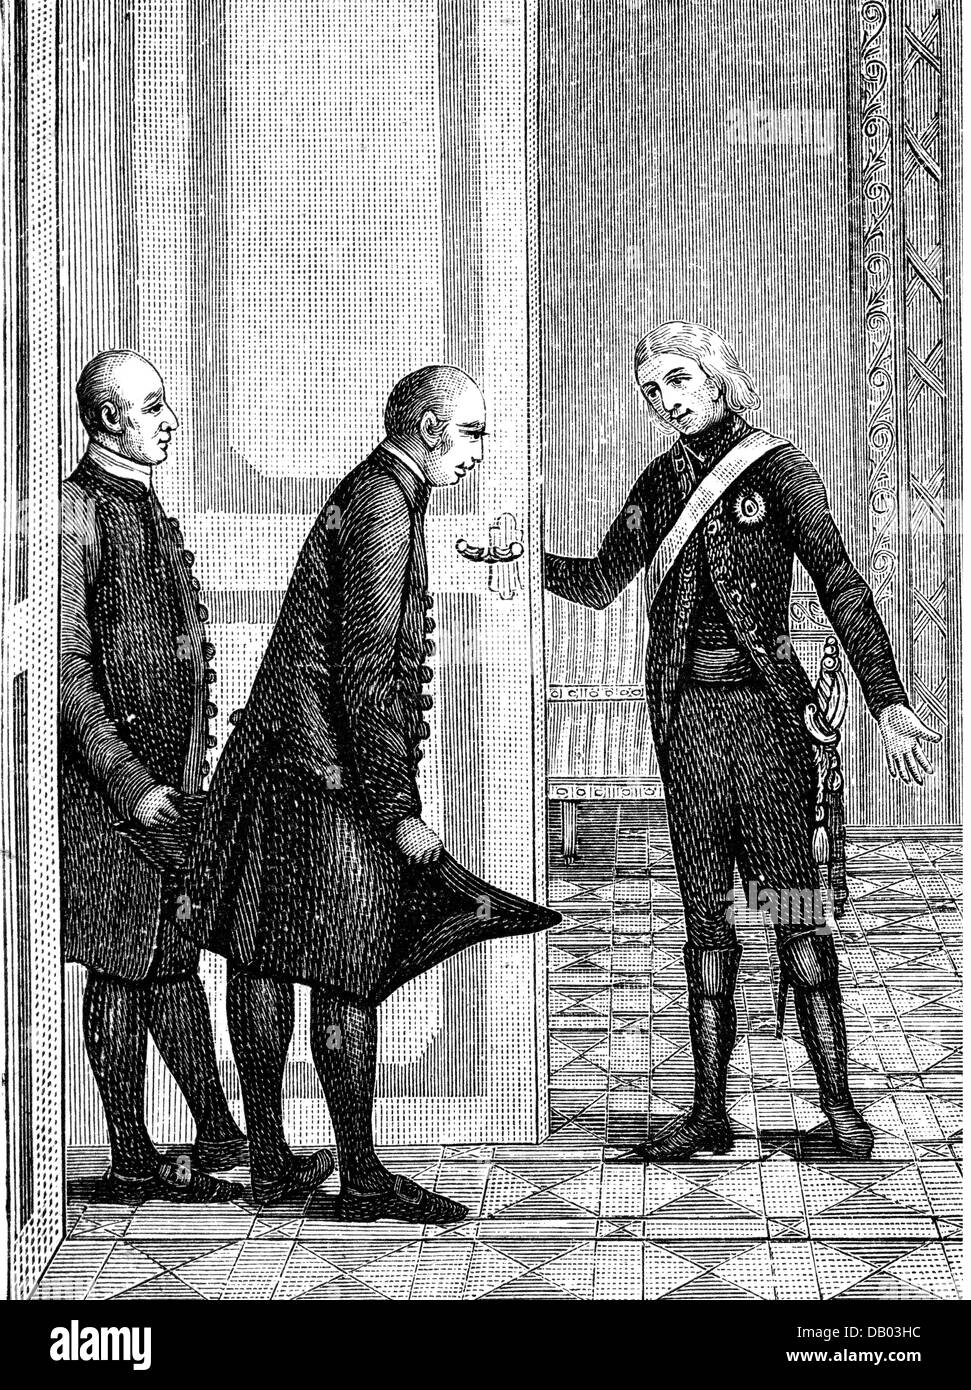 custom, Brauchtum, Halloren, Halle an der Saale, Germany, deputation of Halloren is welcomed by King Frederick II 'the Great' of Prussia, circa 1750, wood engraving, 1890, Additional-Rights-Clearences-Not Available Stock Photo